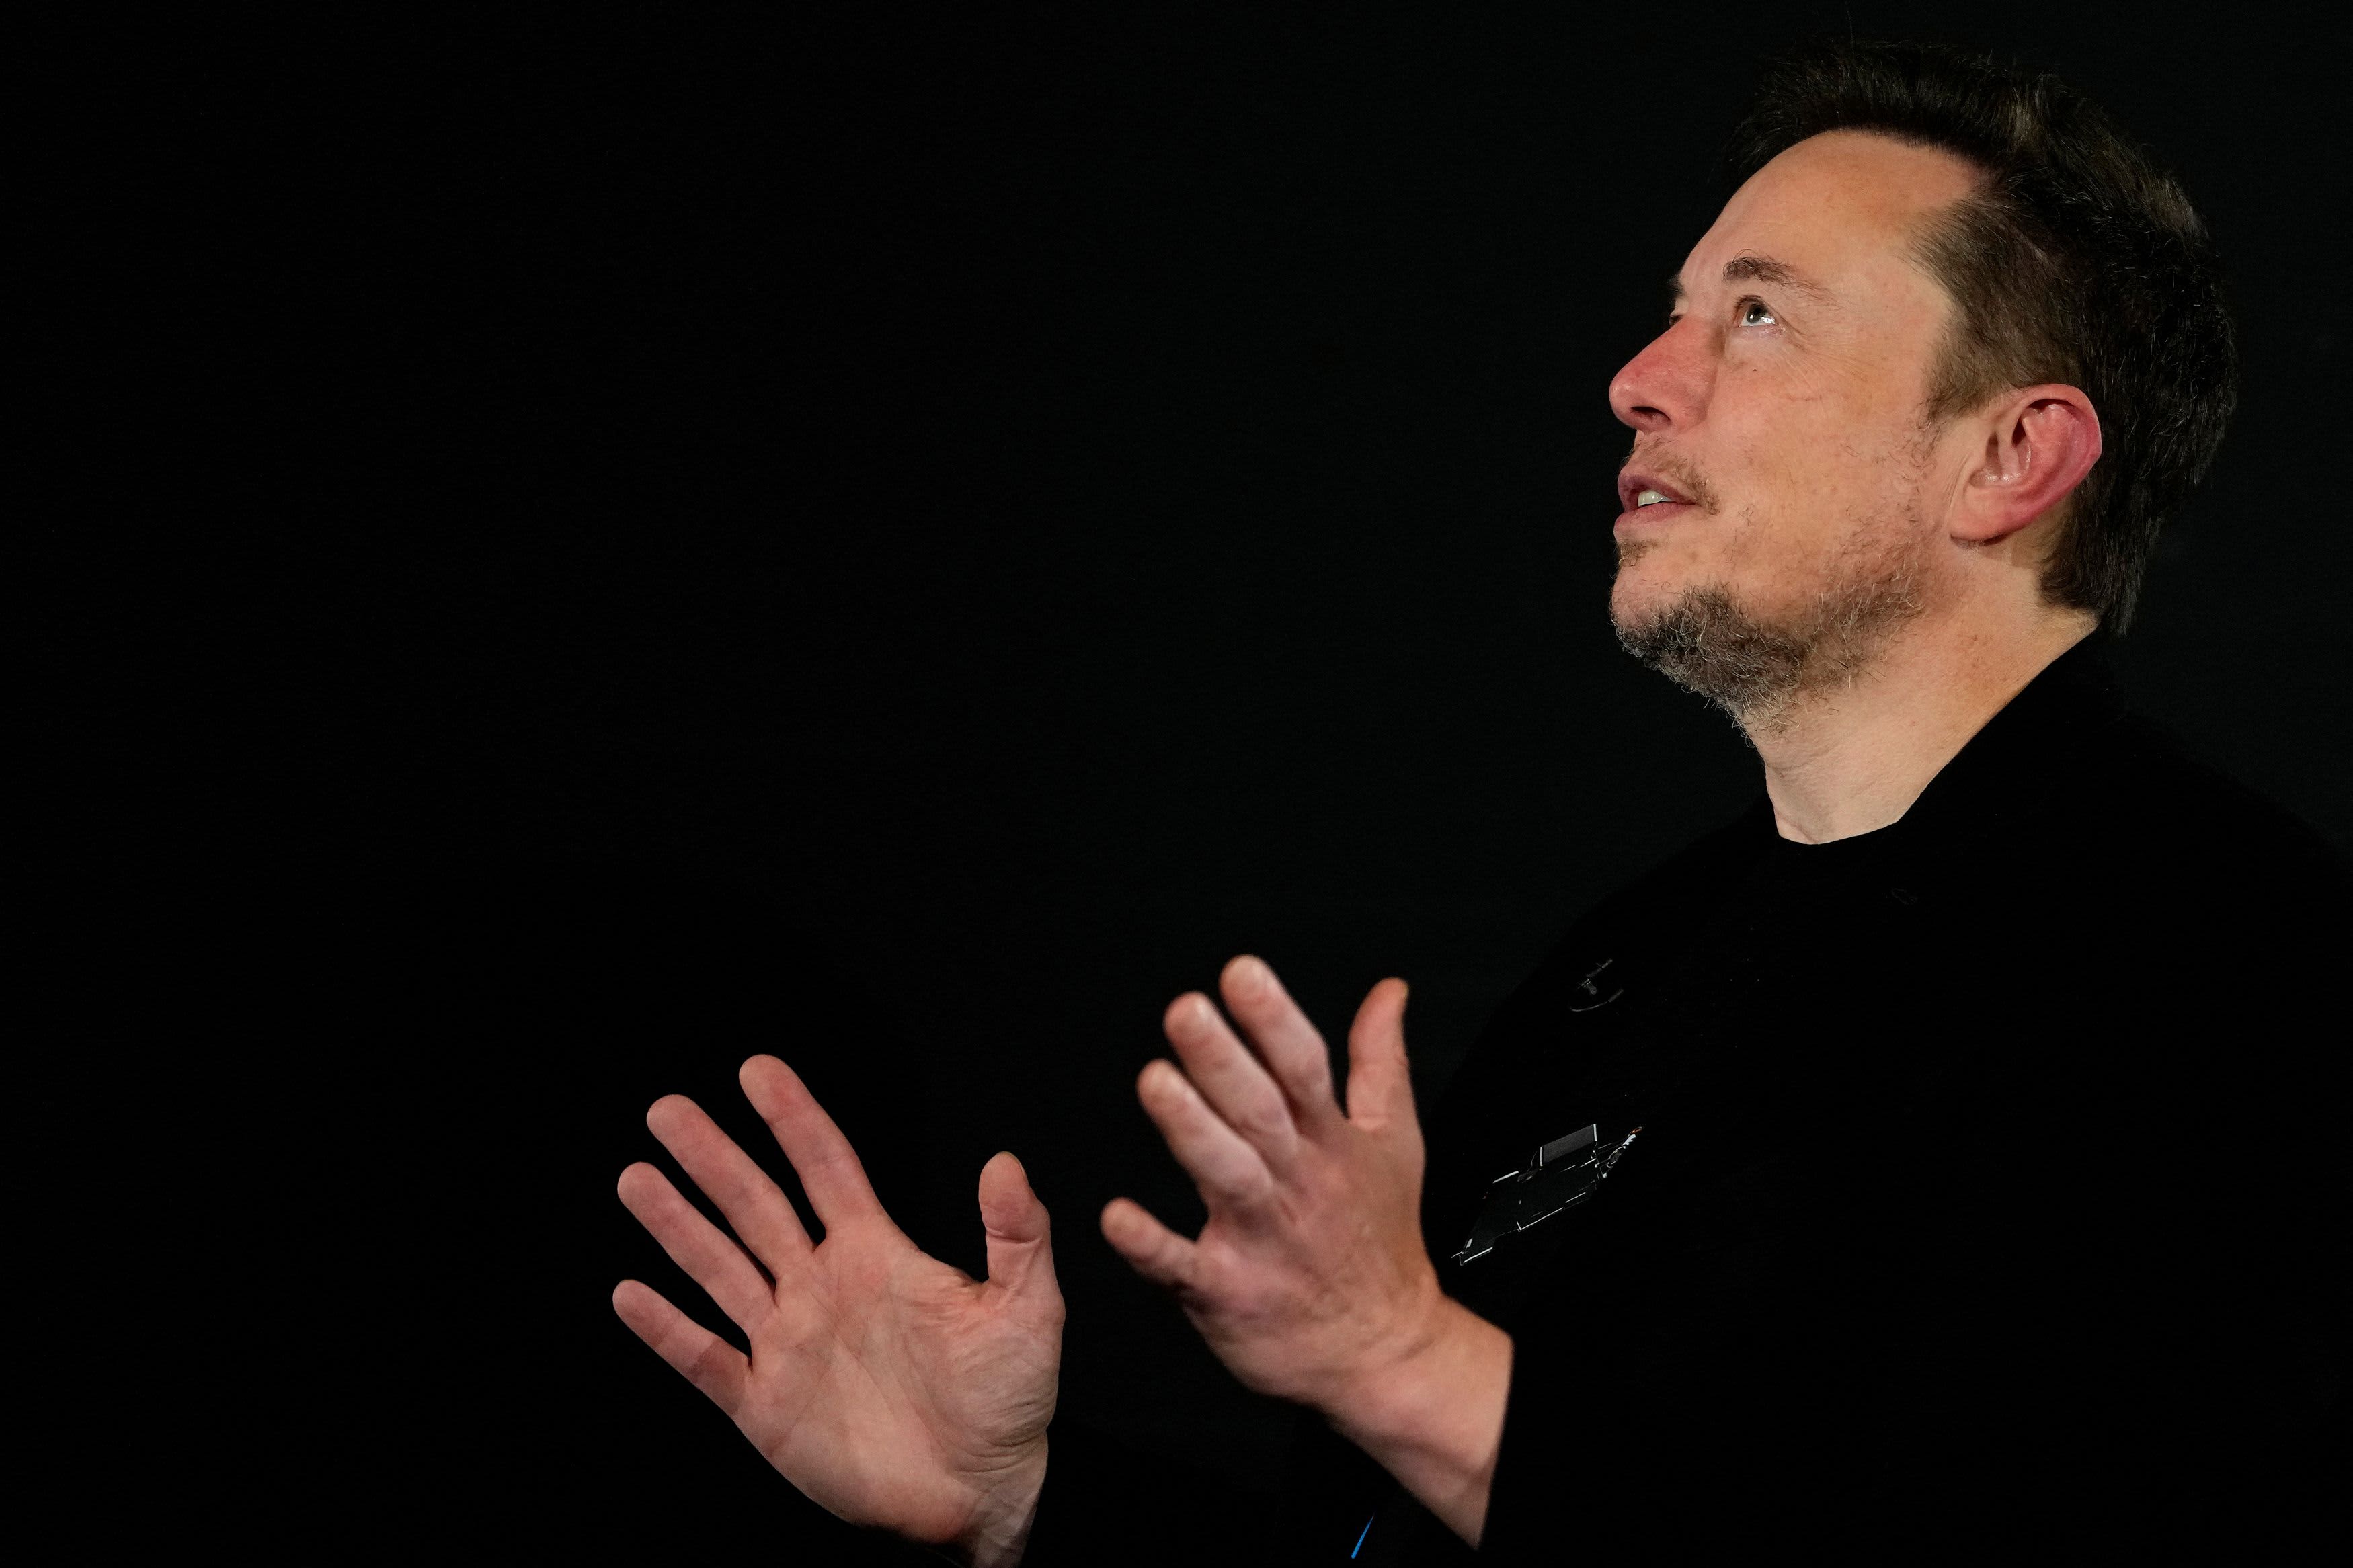 Elon Musk asserted that advertisers are attempting to “coercion” him, and then stated “Go screw yourself”.